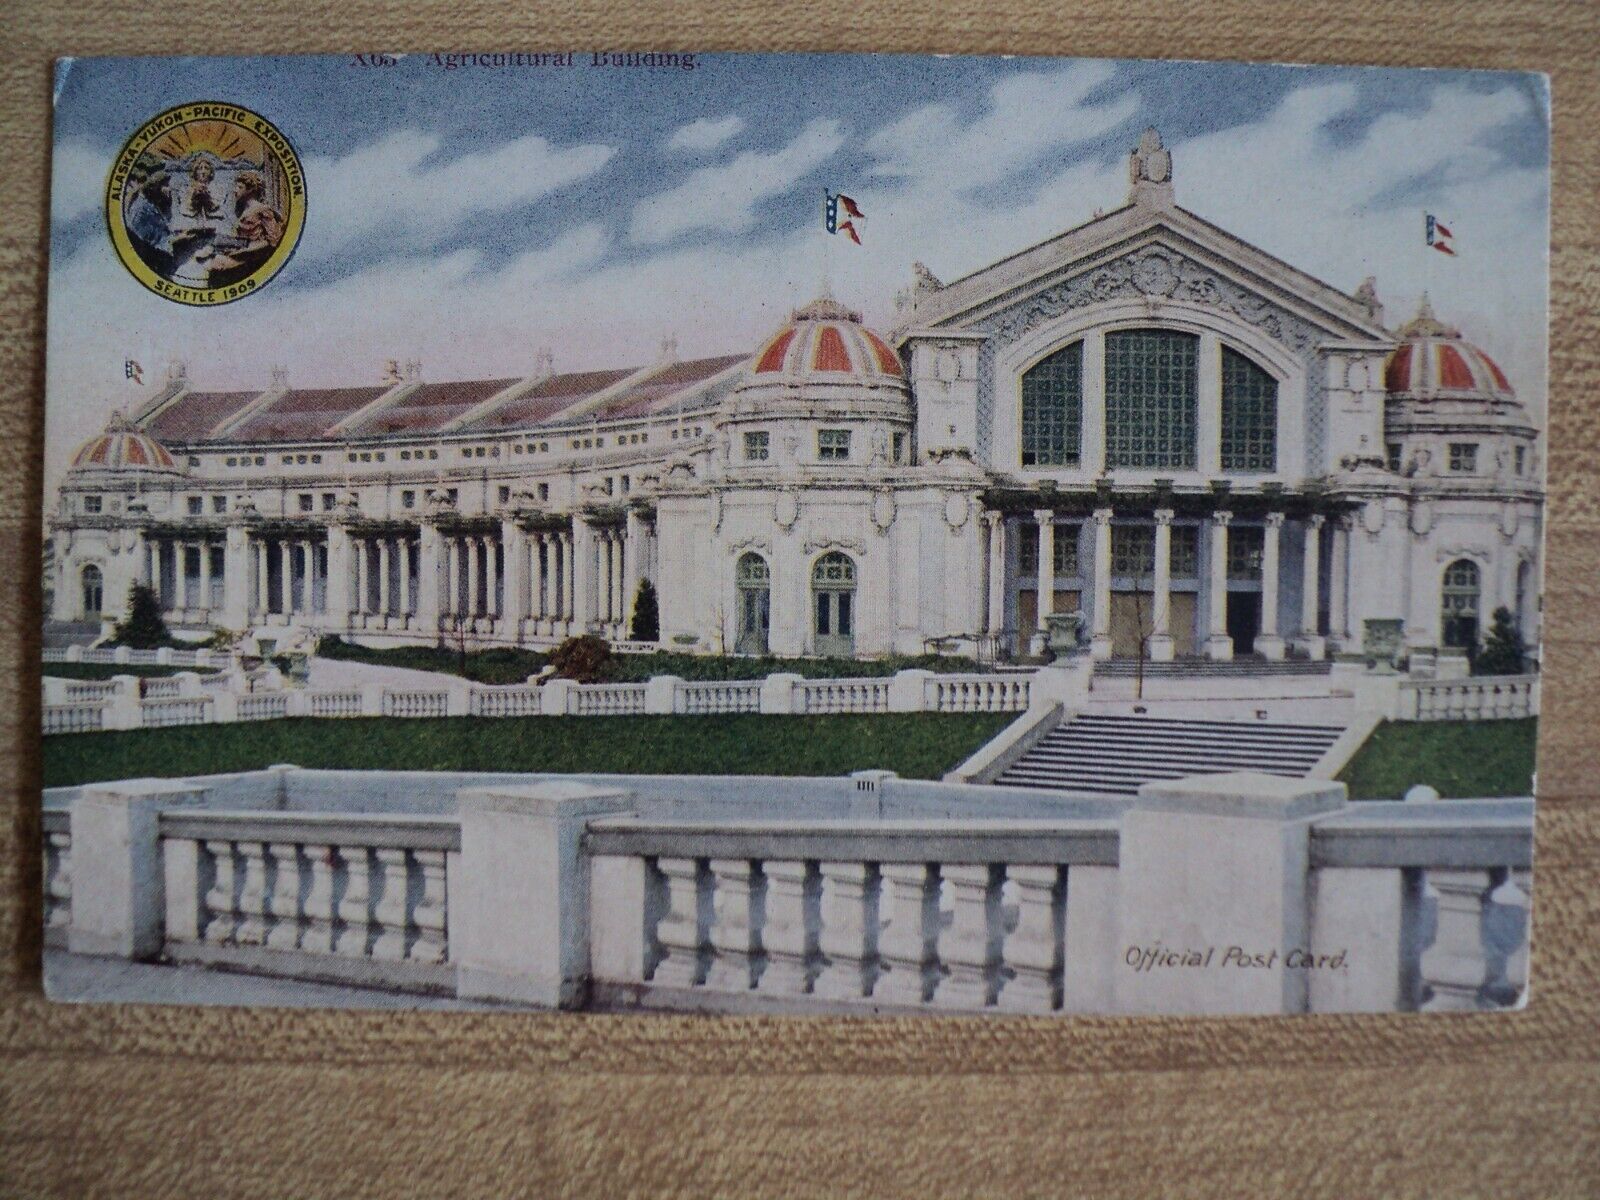 ALASKA YUKON PACIFIC Exposition 1909 in Seattle WA Agriculture Building Postcard